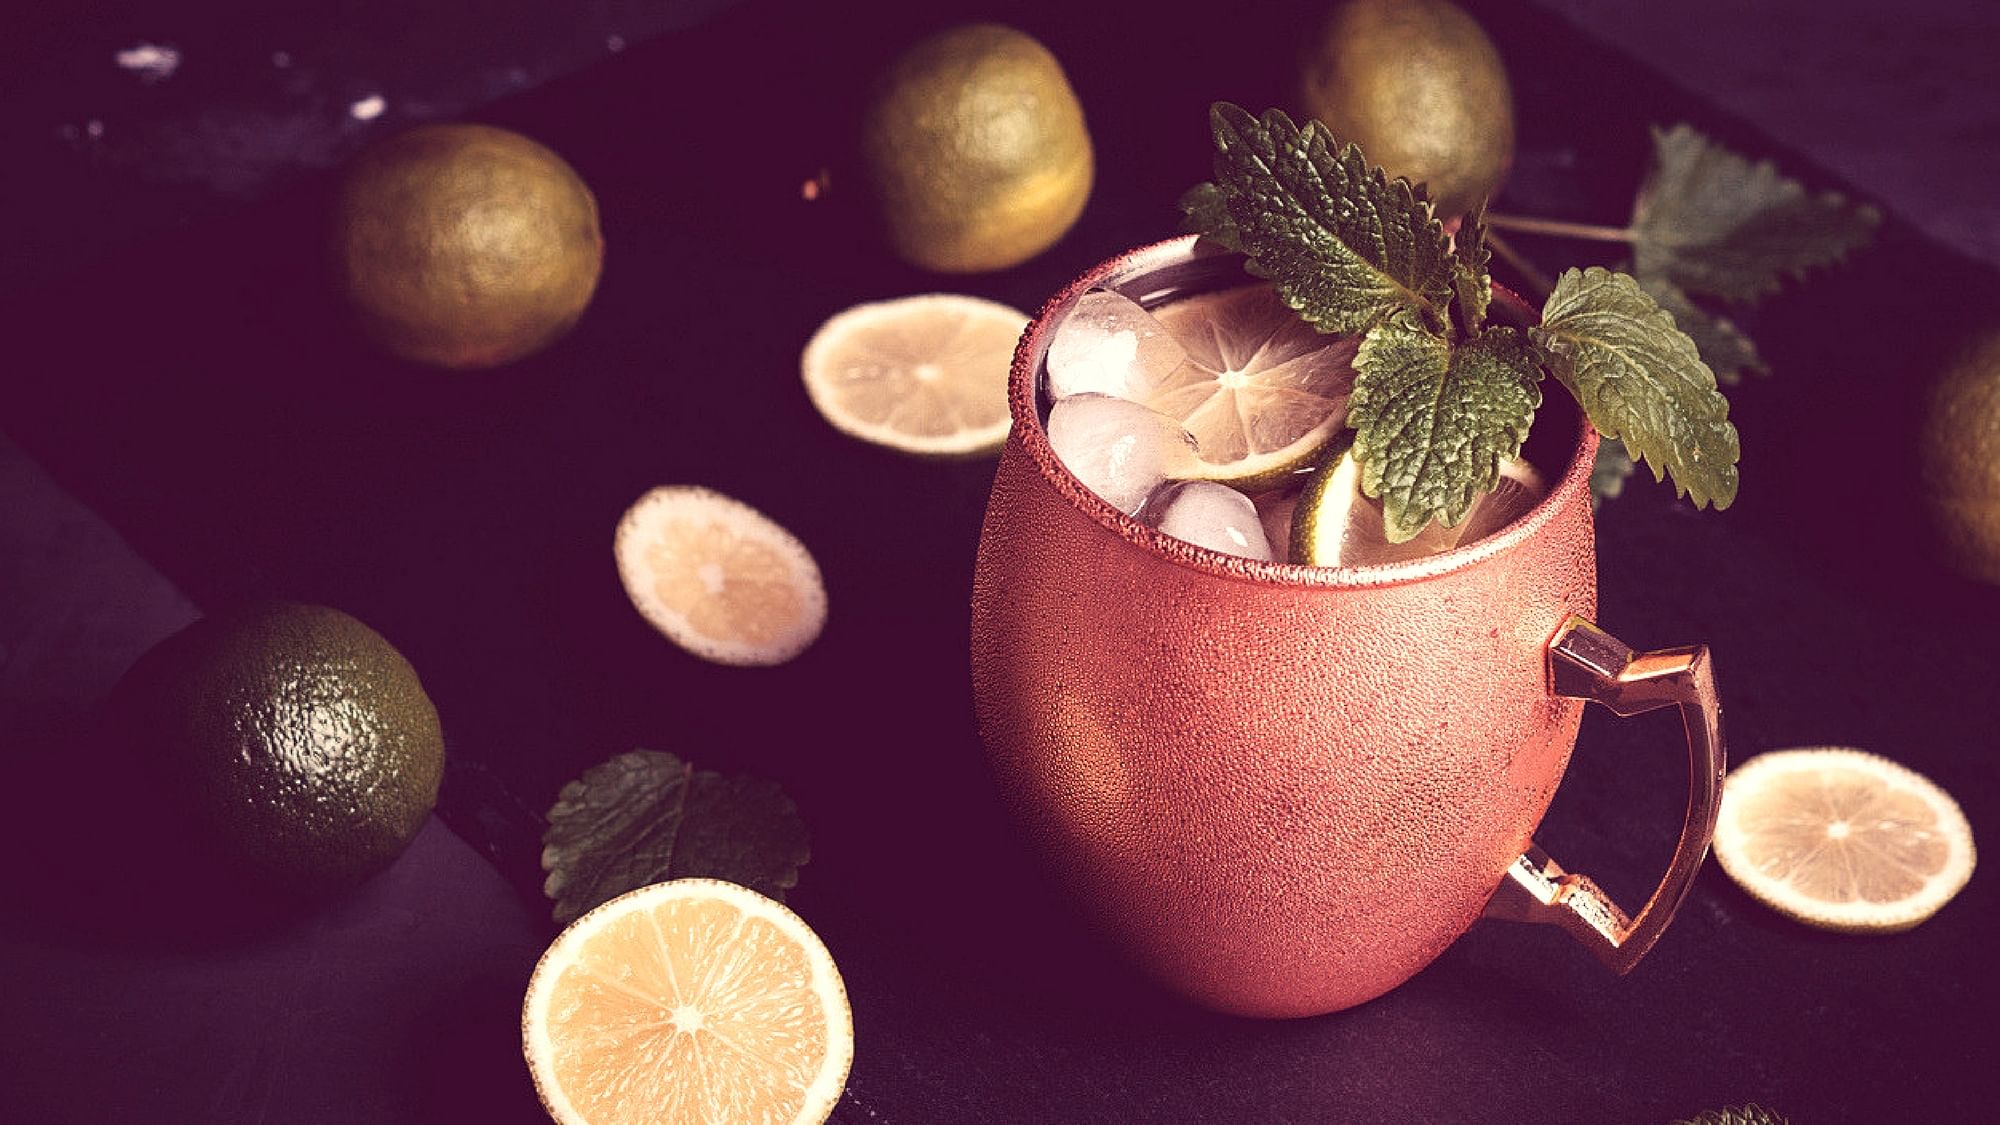 The legend of the Moscow Mule begins with three simple ingredients: three vagabonds, some vodka, and a Polaroid.